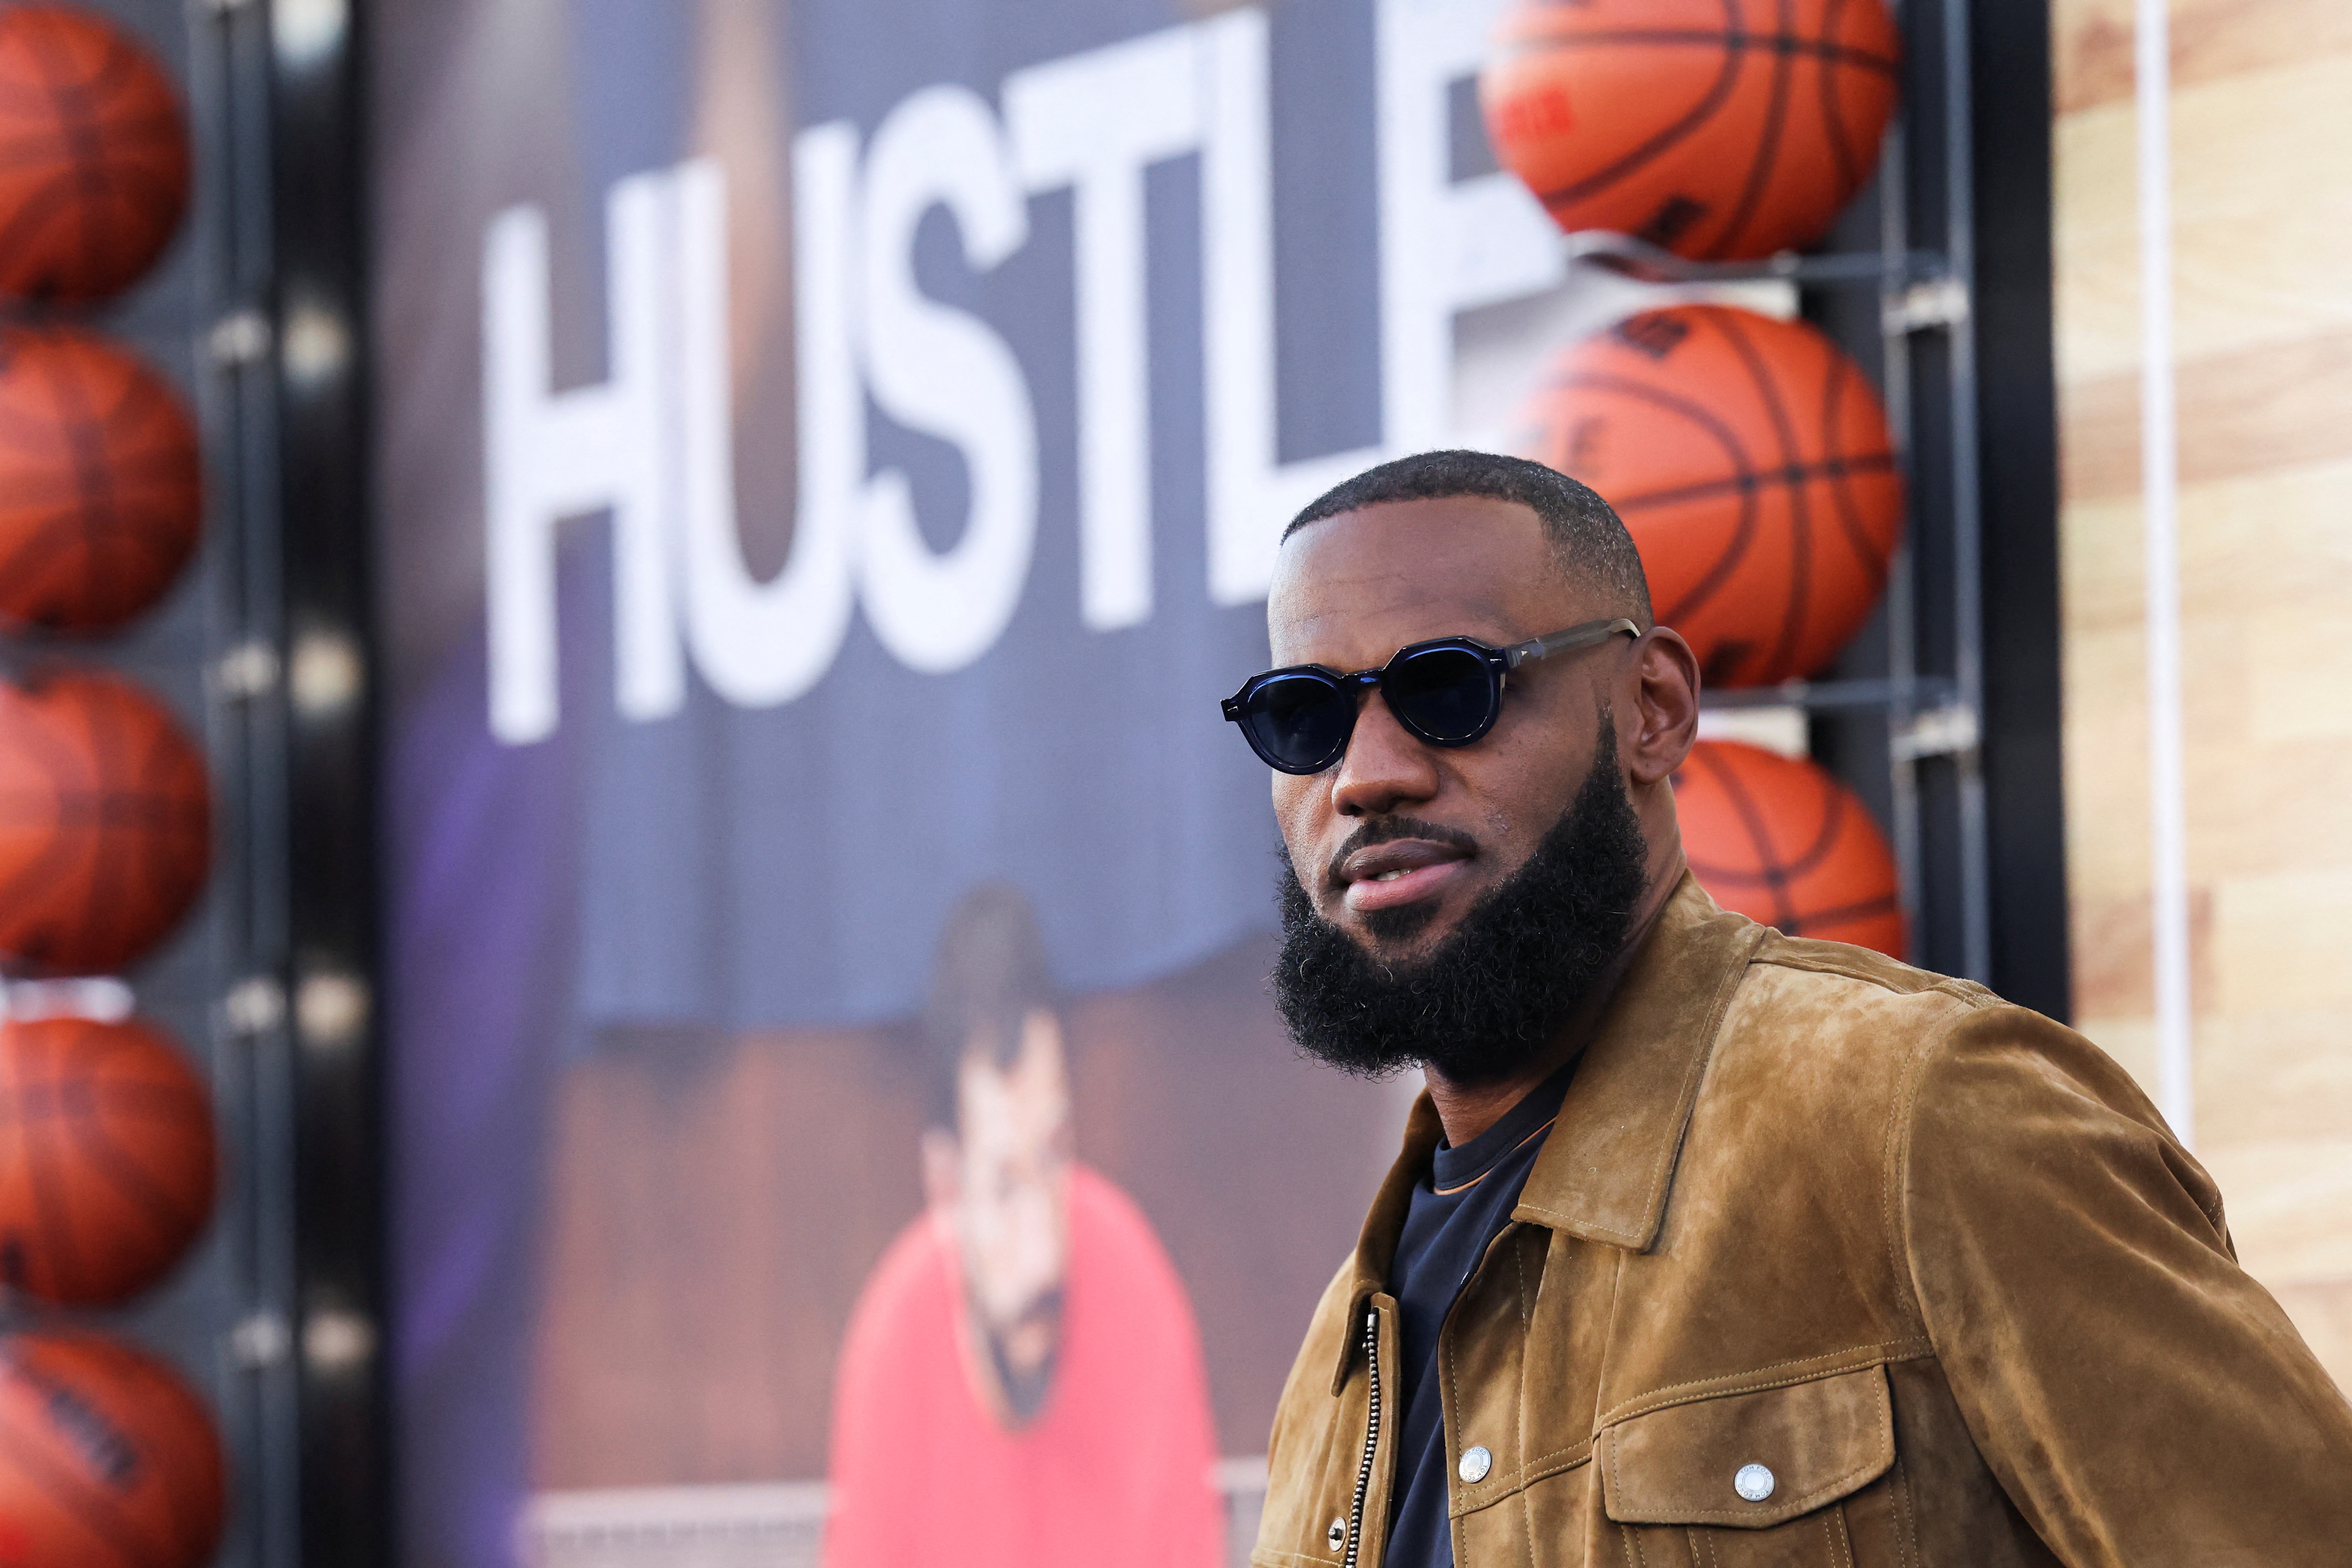 Cast member LeBron James attends a premiere for the film 